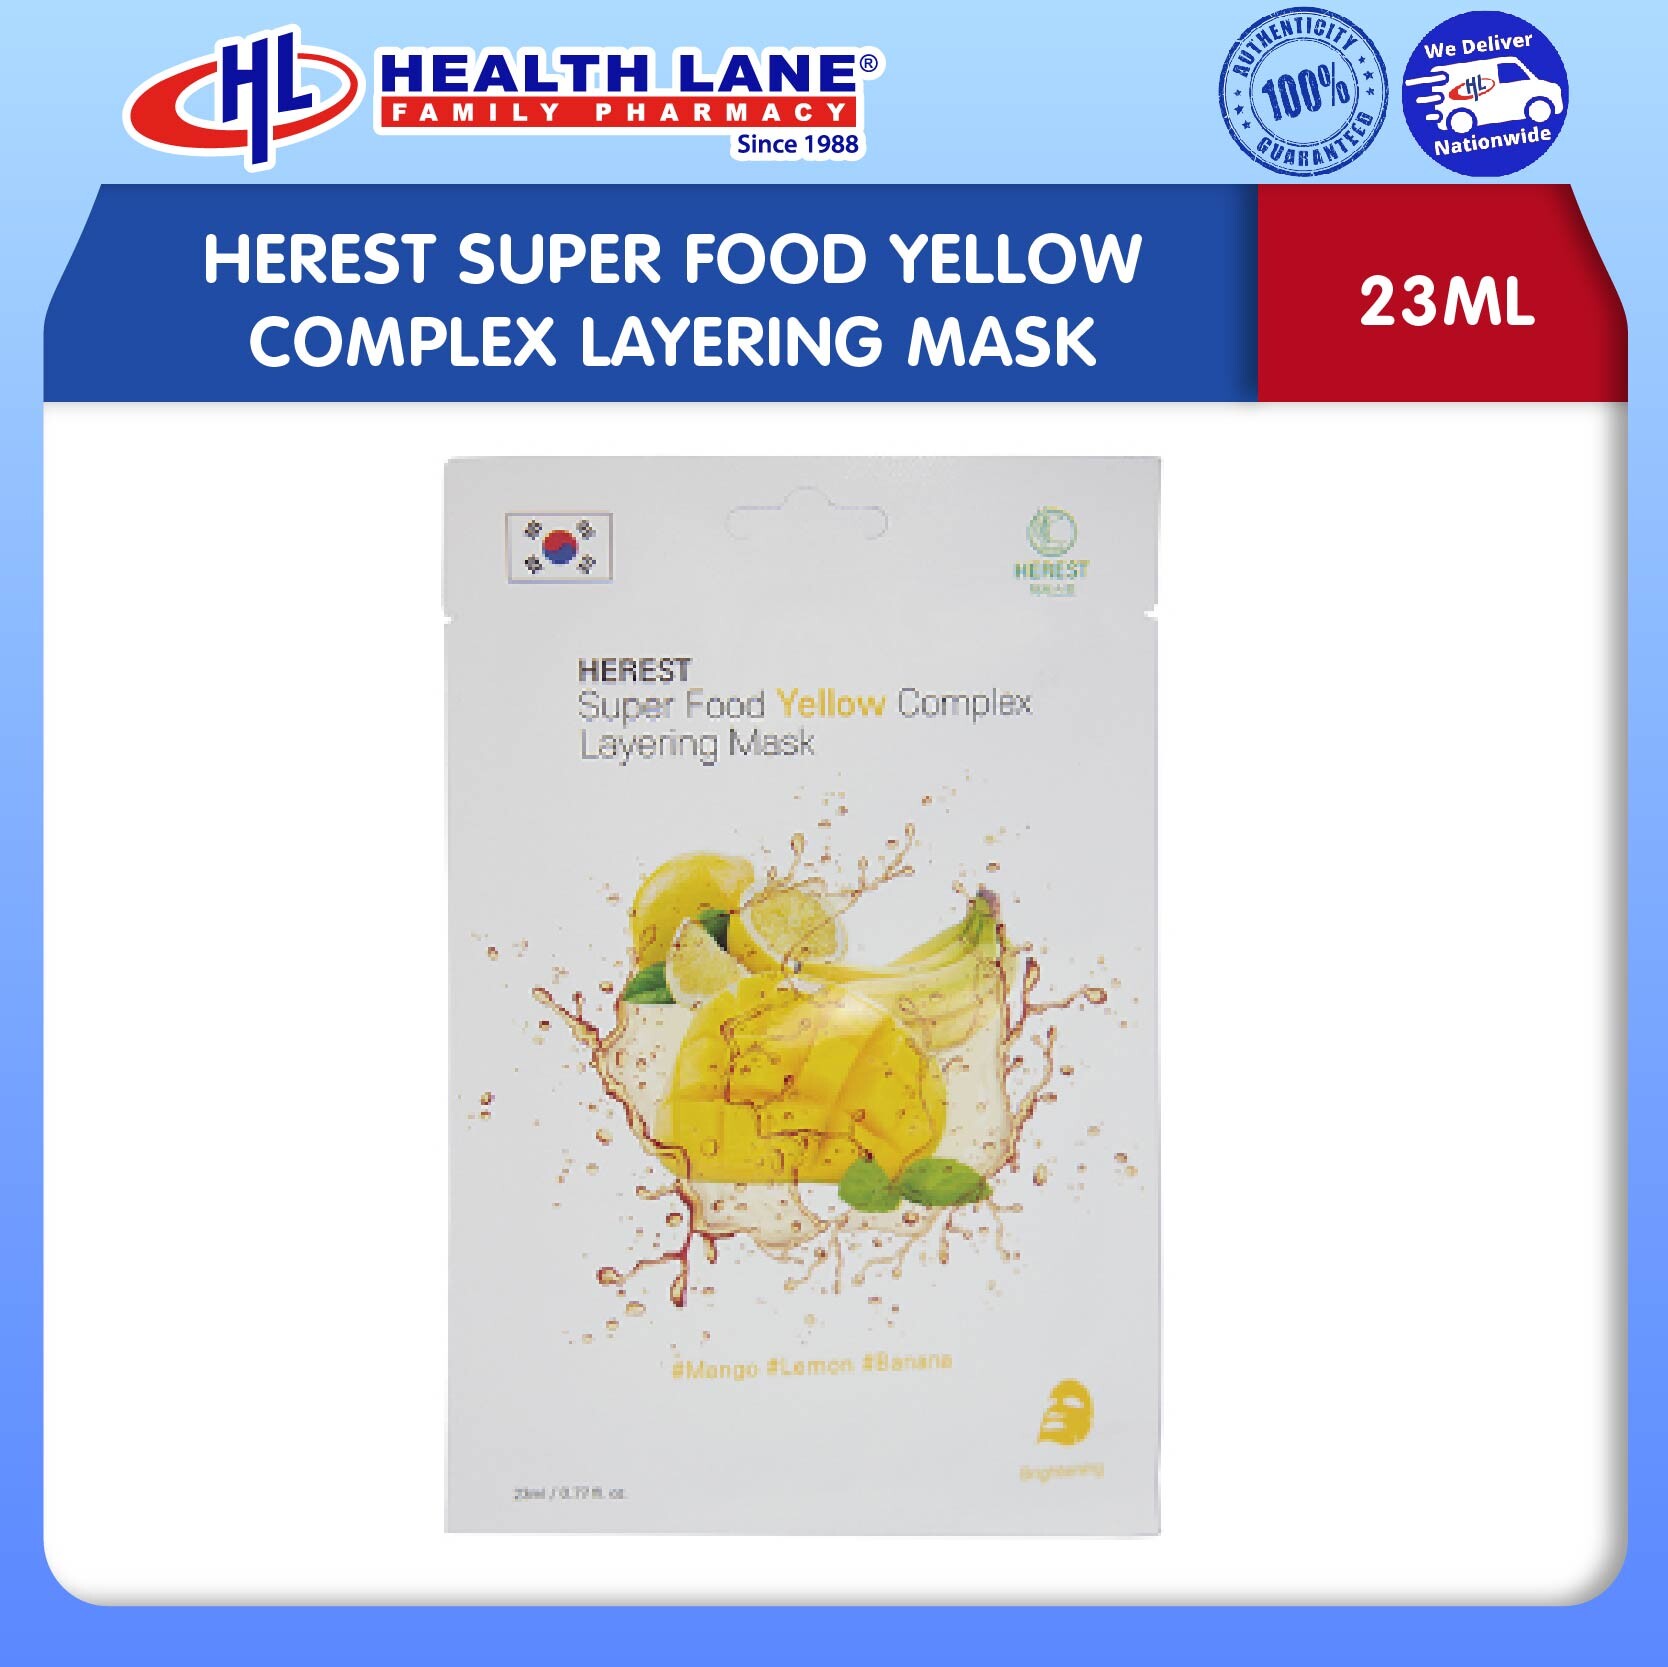 HEREST SUPER FOOD YELLOW COMPLEX LAYERING MASK (23ML)